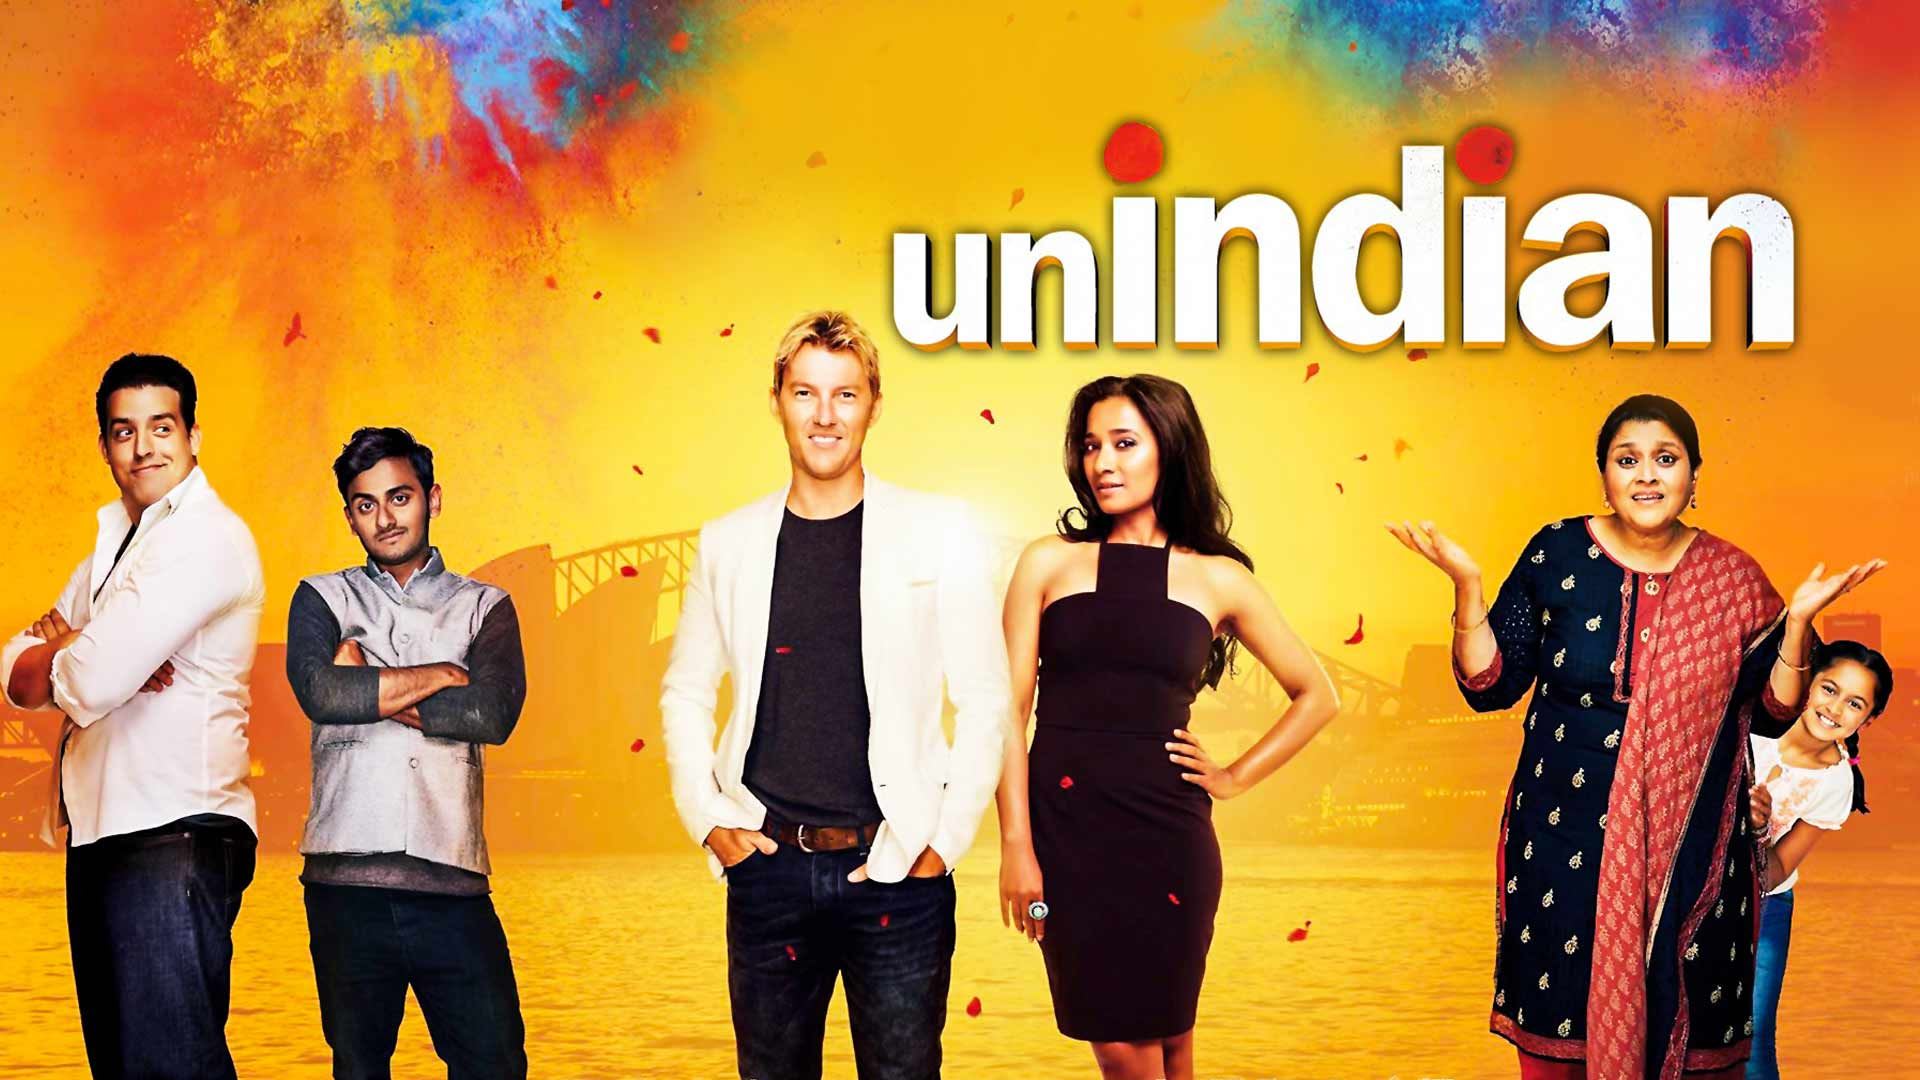 Watch Movie UnIndian Only on Watcho